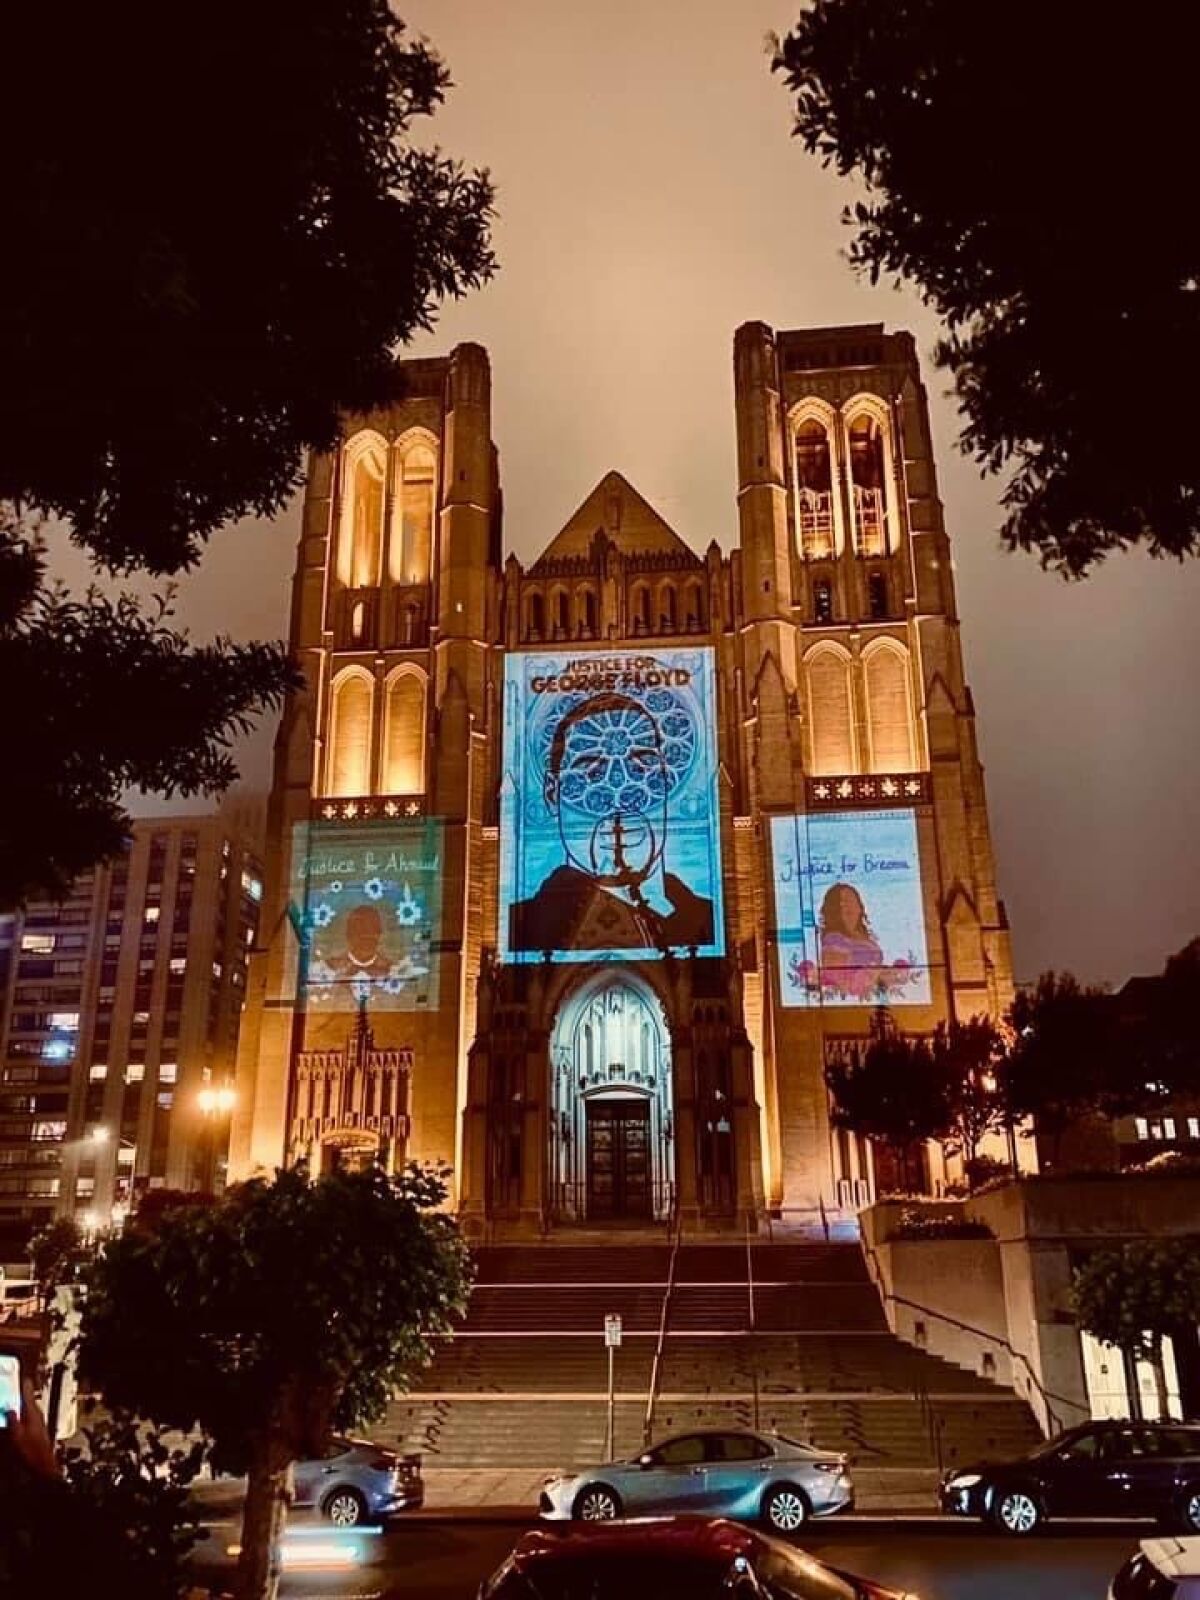 Designs of George Floyd, Ahmaud Arbery and Breonna Taylor projected onto the Grace Cathedral in San Francisco